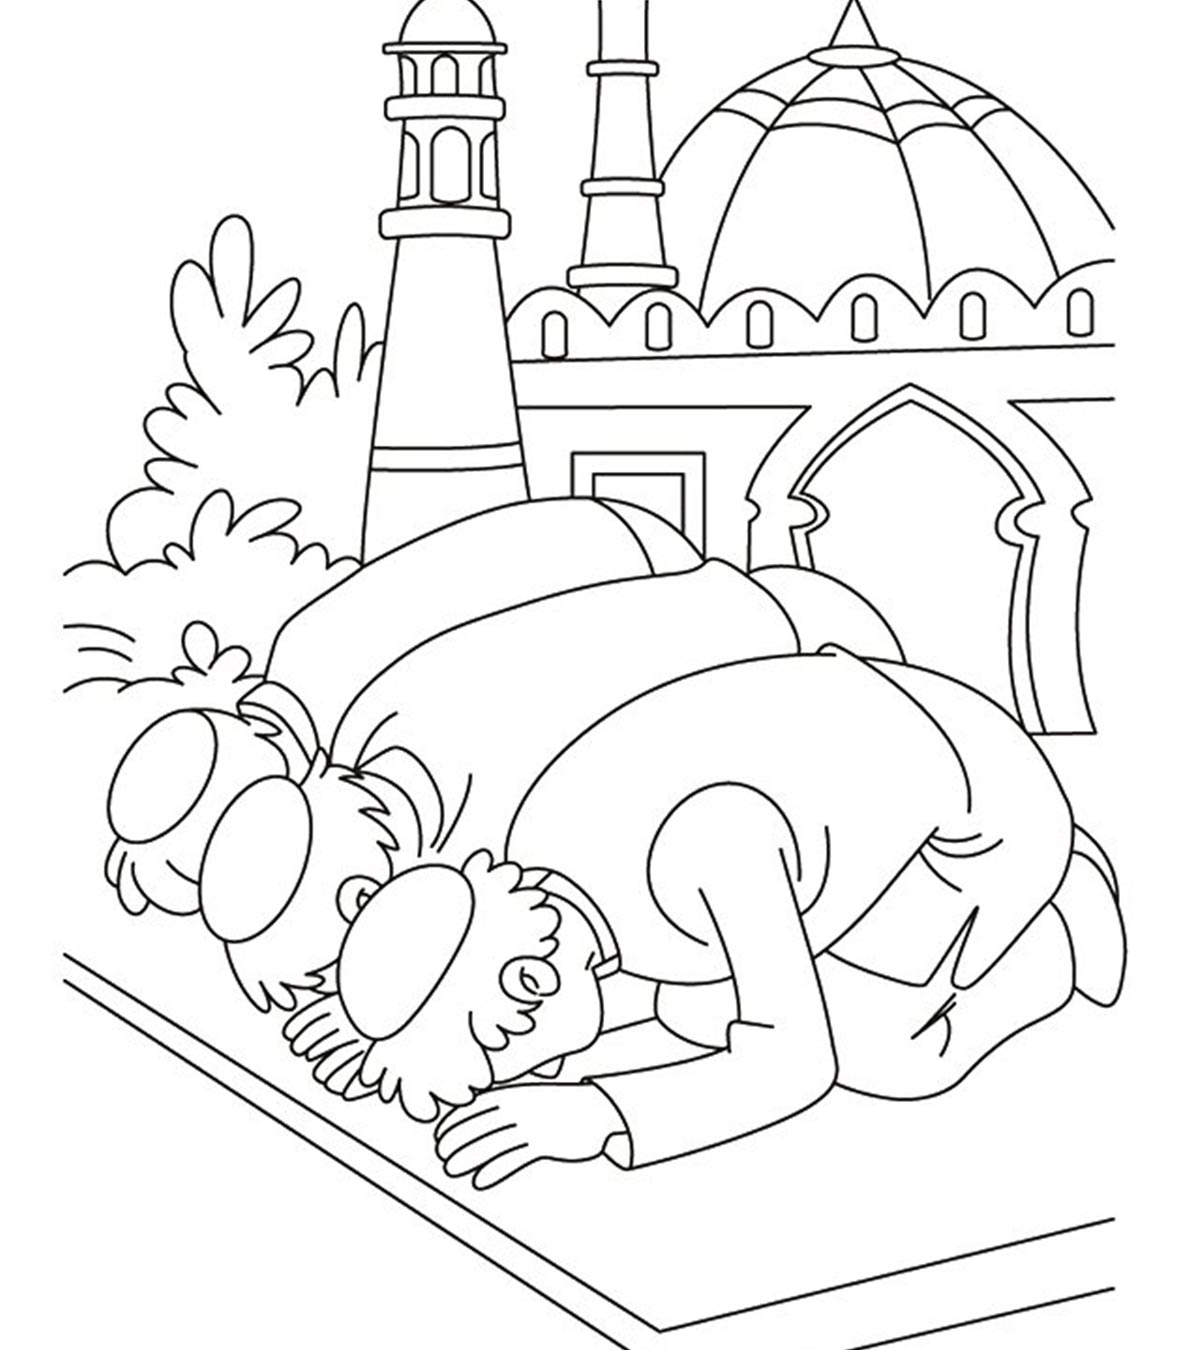 Top 10 Ramadan (Eid) Coloring Pages For Toddlers